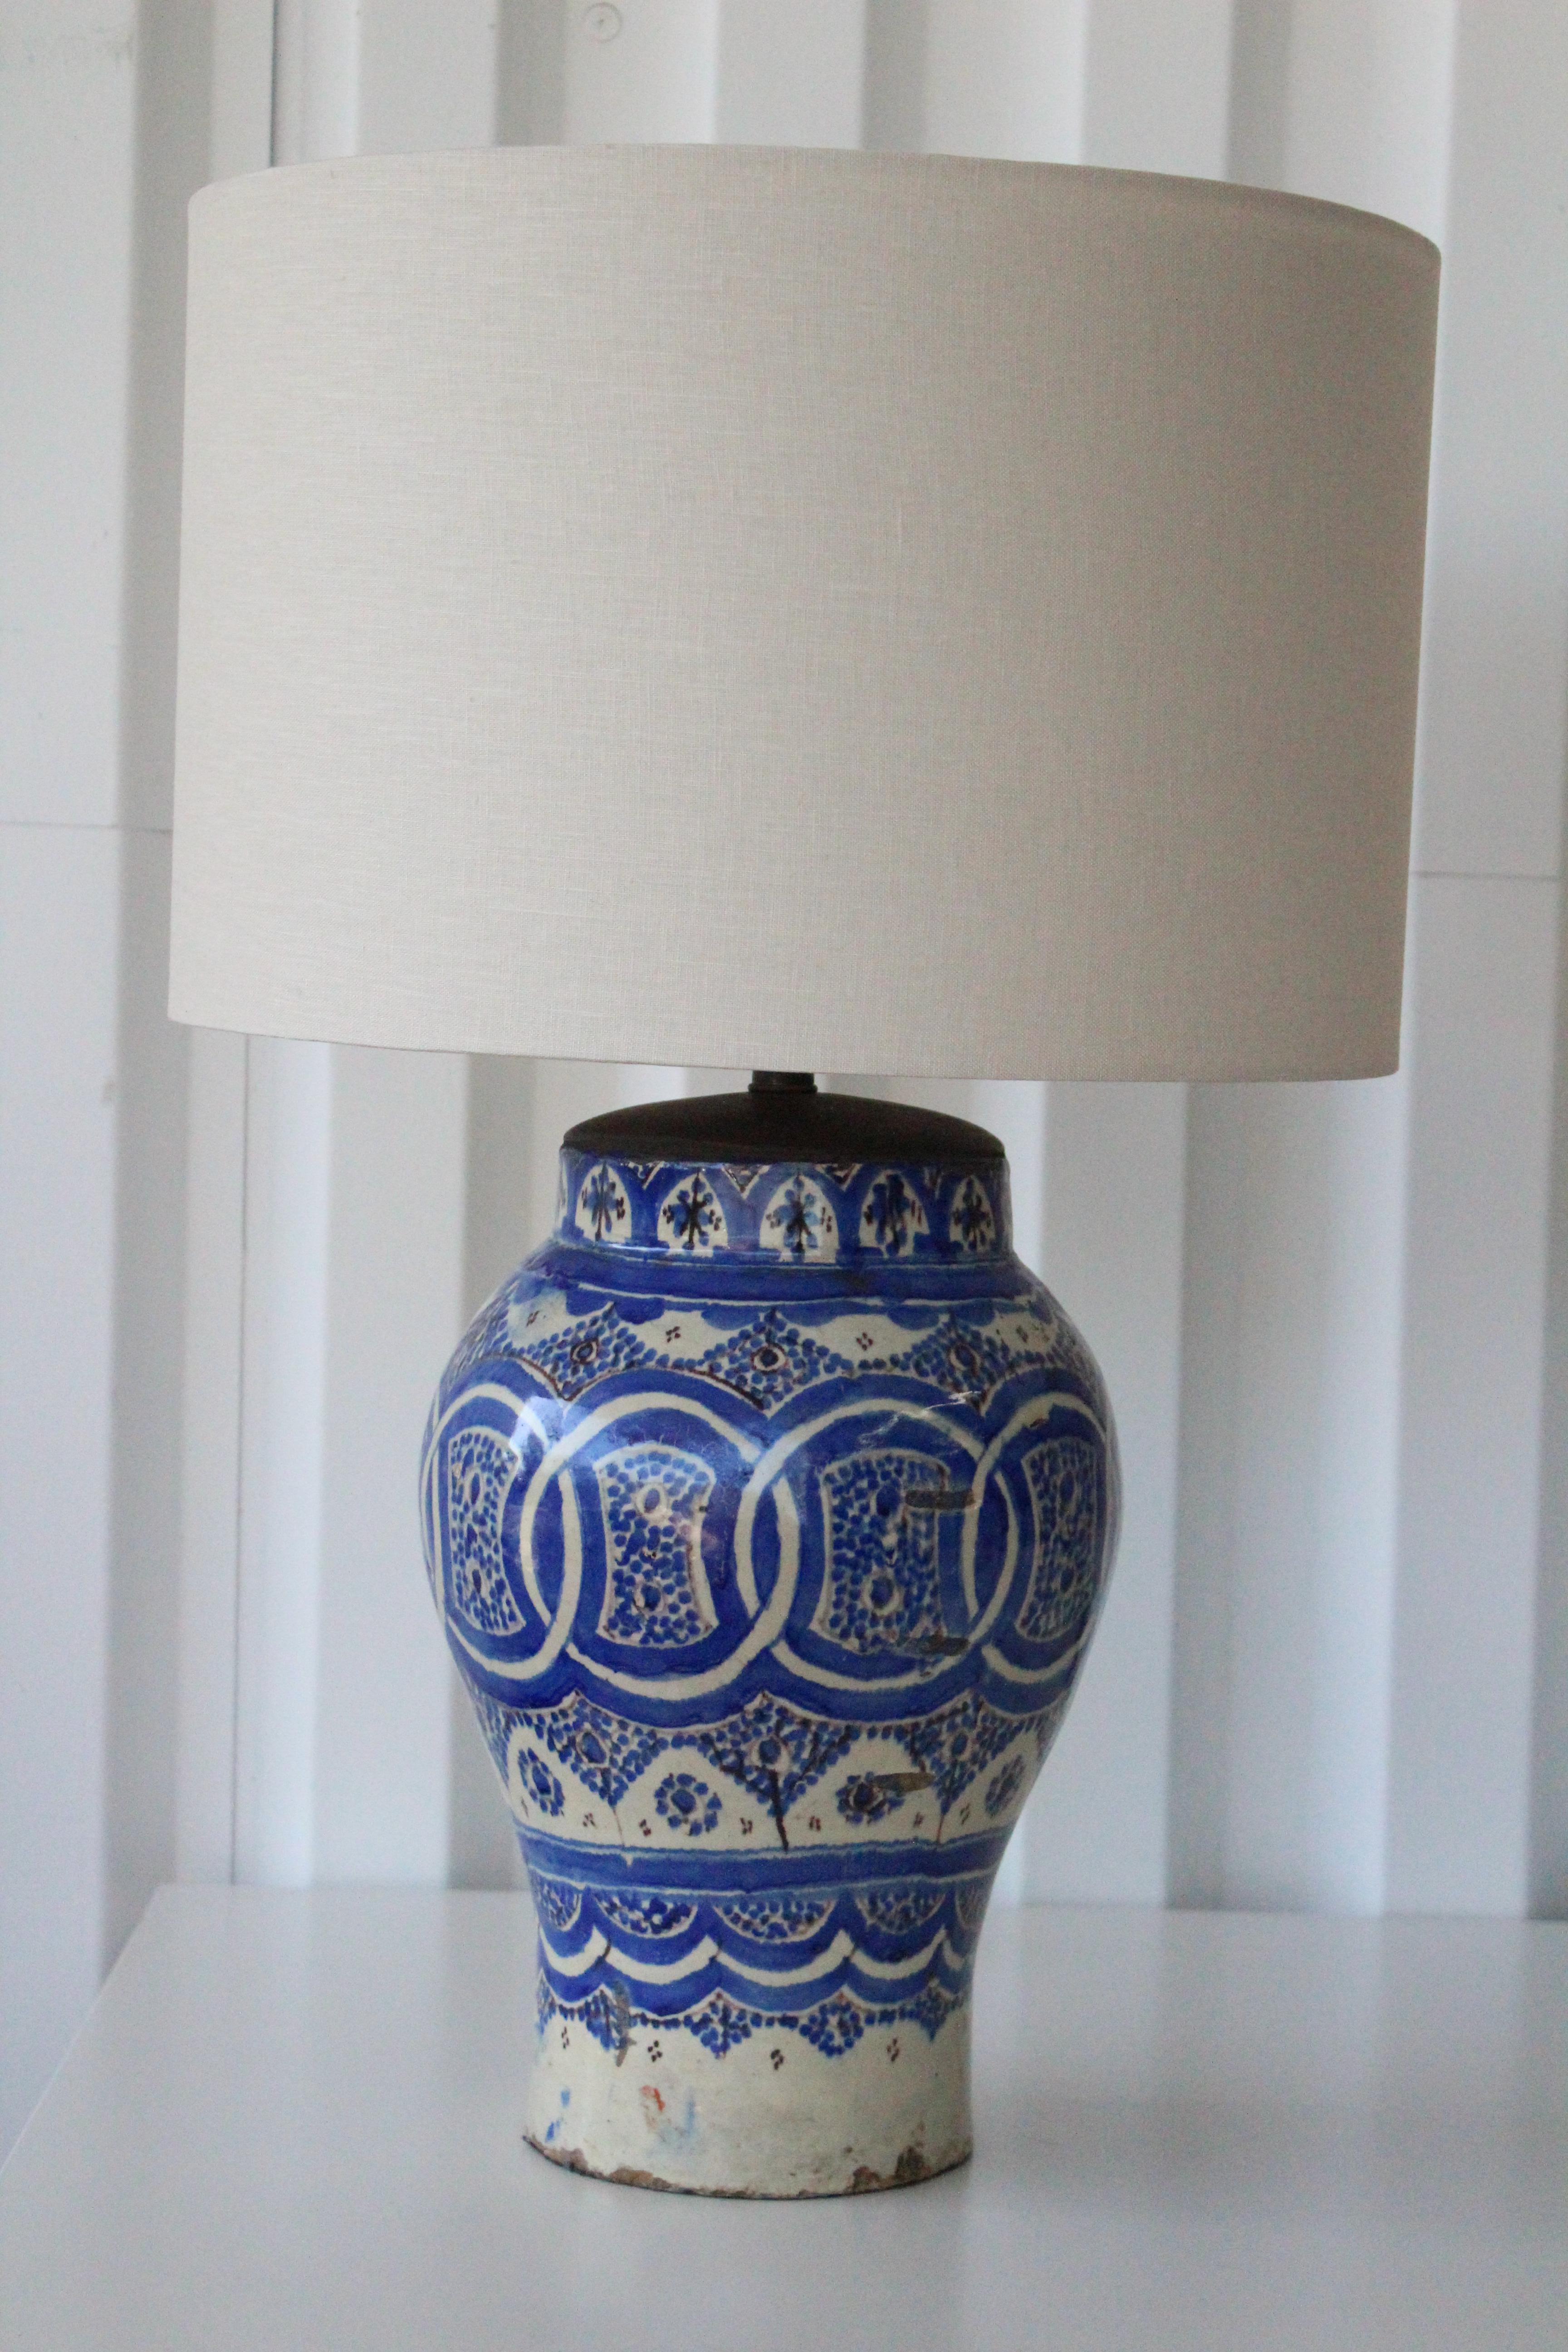 Beautiful pair of 18th century hand painted Persian pottery vase table lamps. These have been custom made into table lamps and have all new wiring and custom linen shades. Each hand painted lamp shows age appropriate patina. Pair available, sold